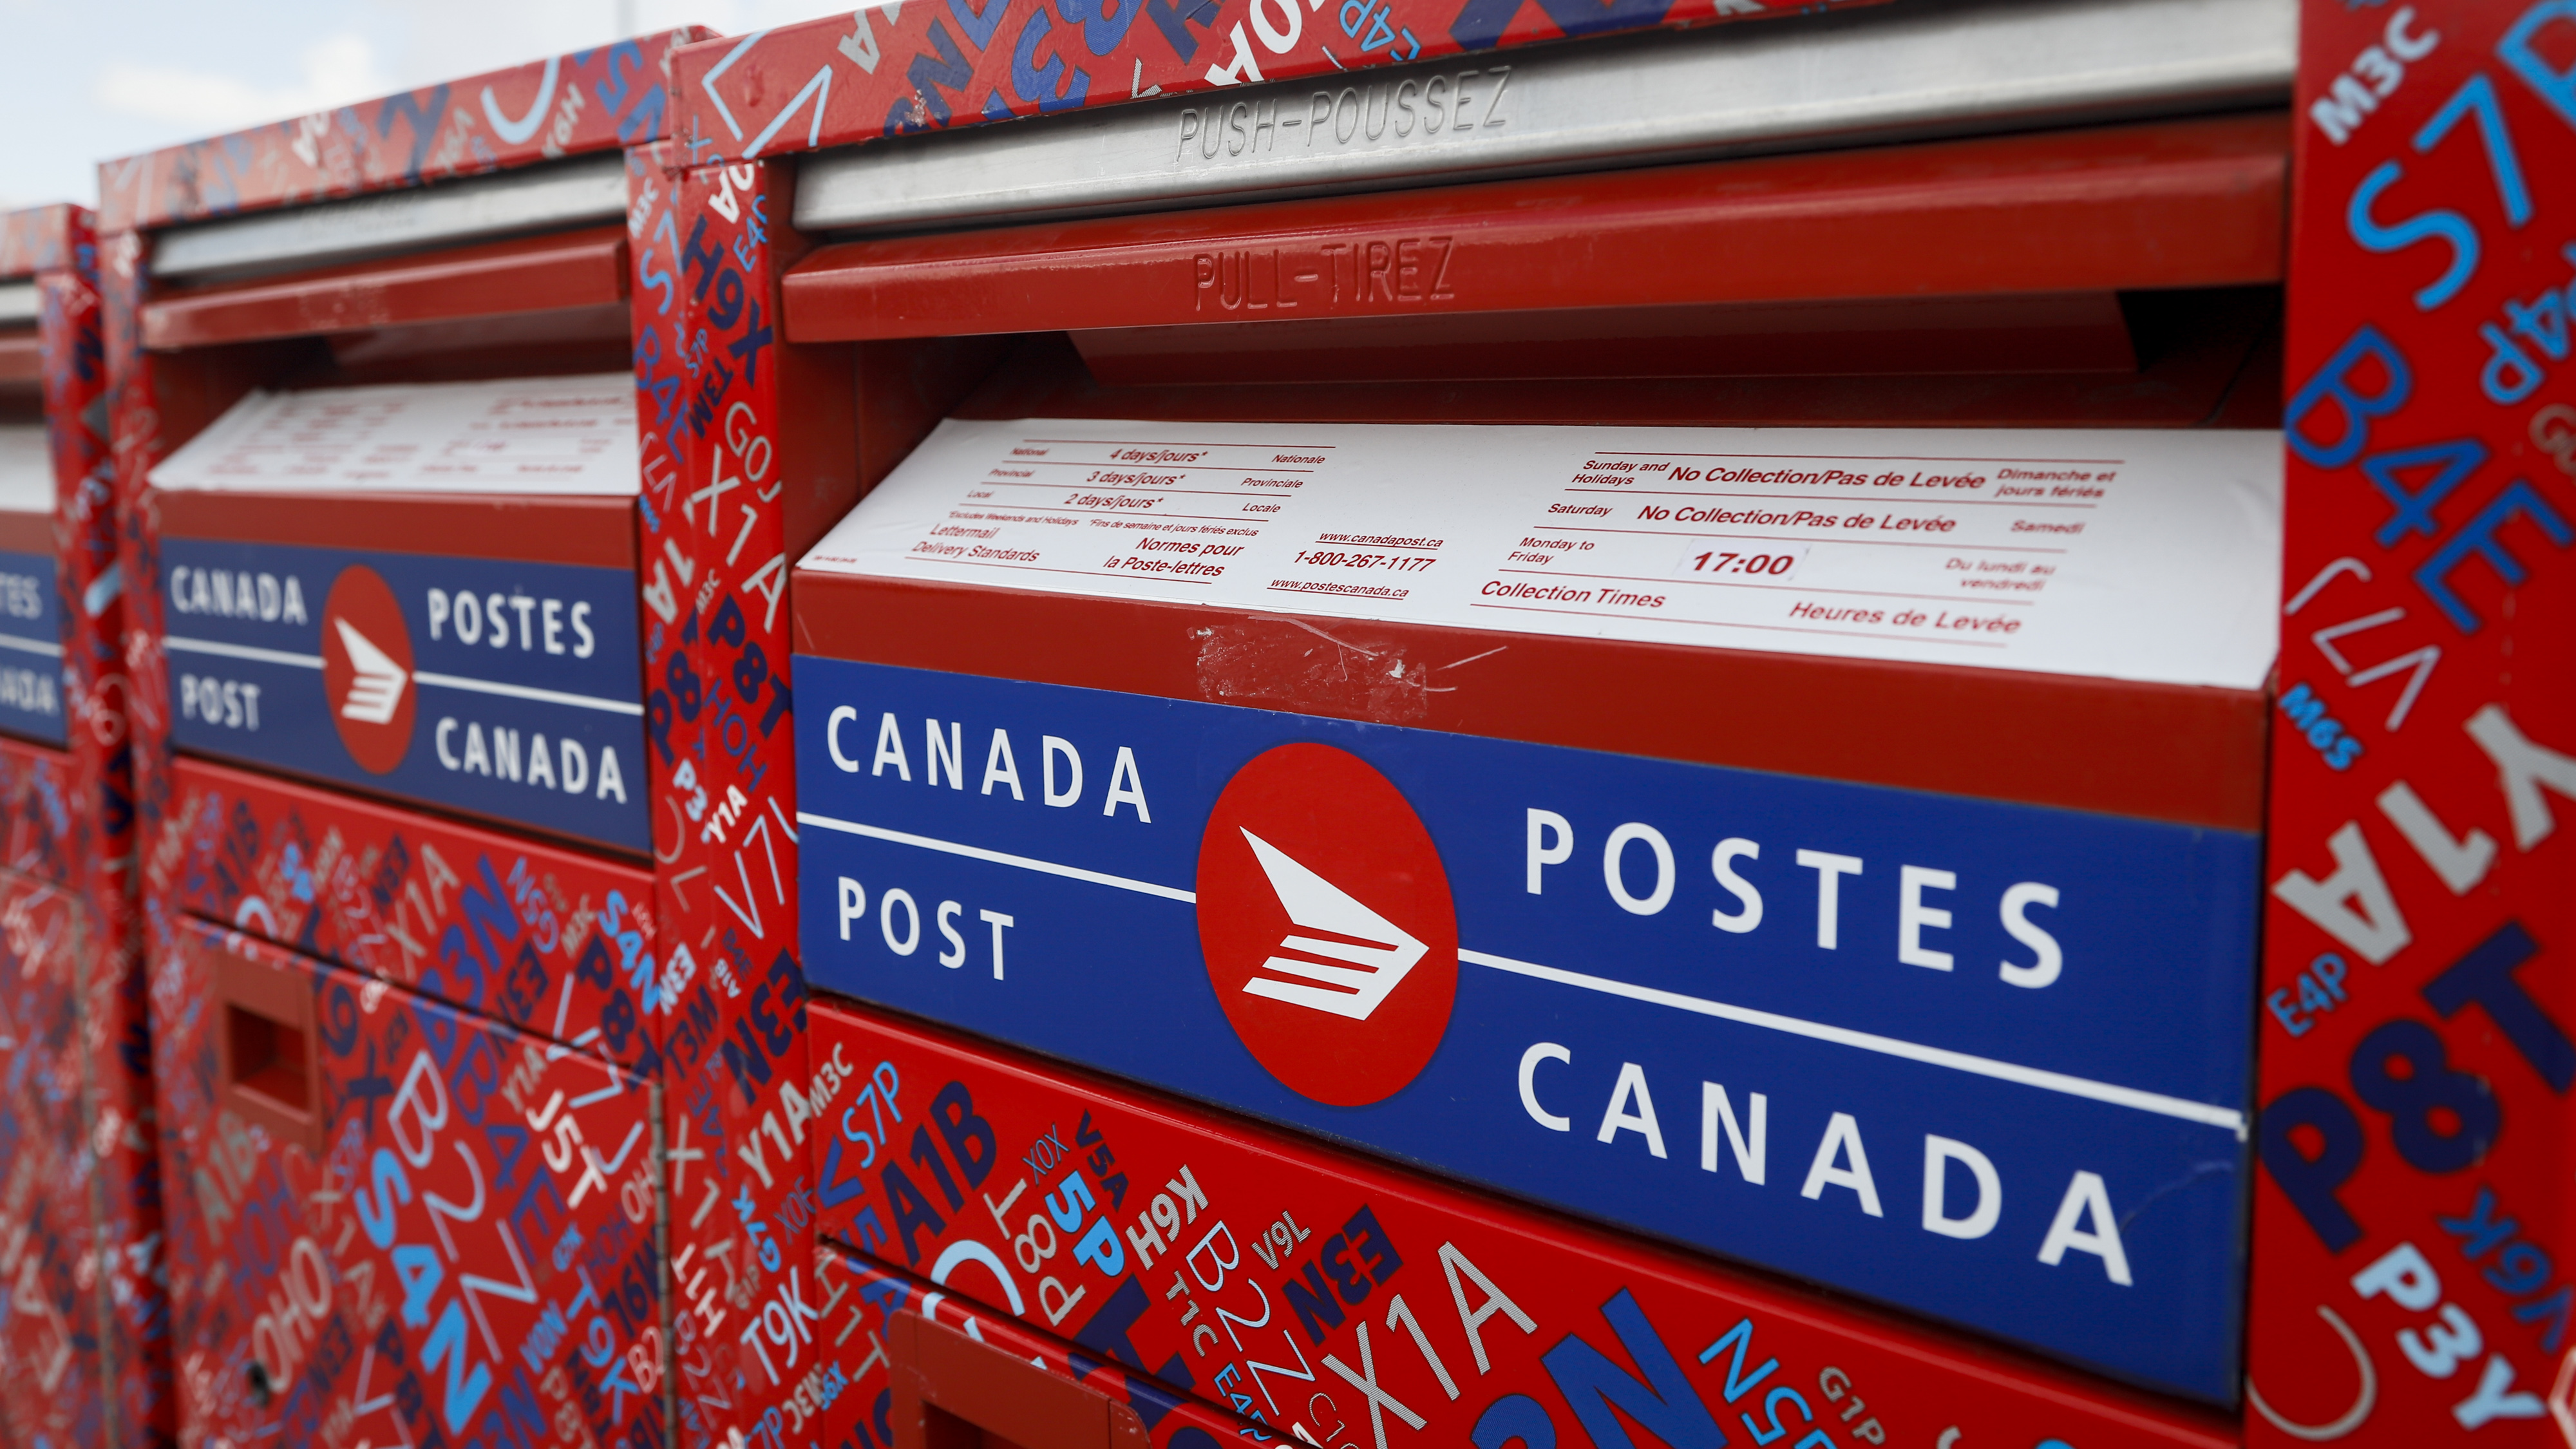 Canada Post urging residents to keep dogs inside when carriers are delivering parcels